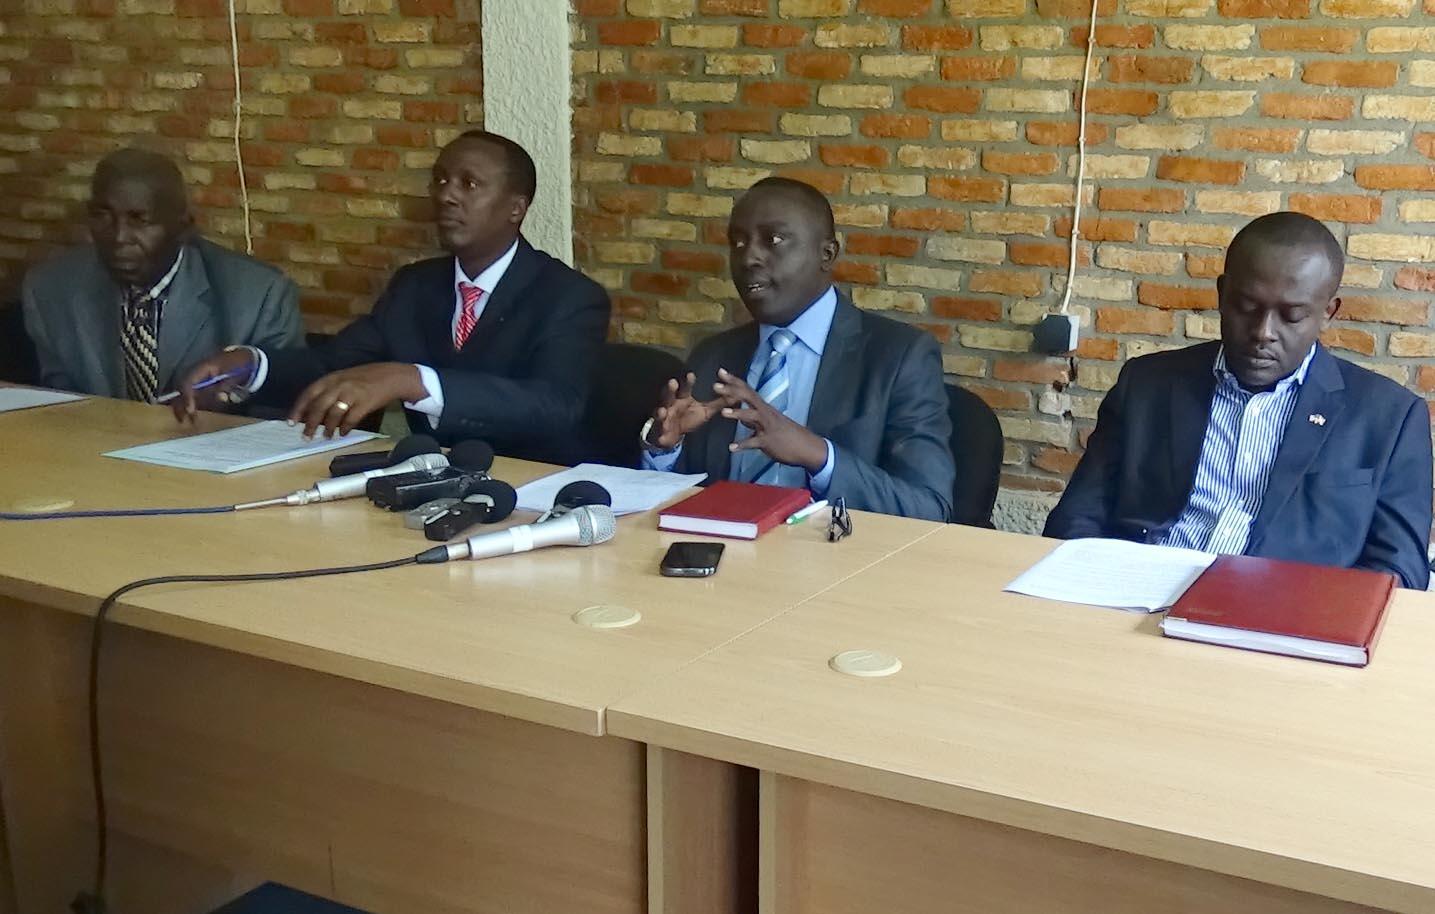 Representatives of 4 of the 10 organizations recently banned or suspended by the Burundi government:  left to right, Pierre Claver Mbonimpa (APRODH), Vital Nshimirimana (FORSC), Pacifique Nininahazwe (FOCODE), and Armel Niyongere (ACAT).